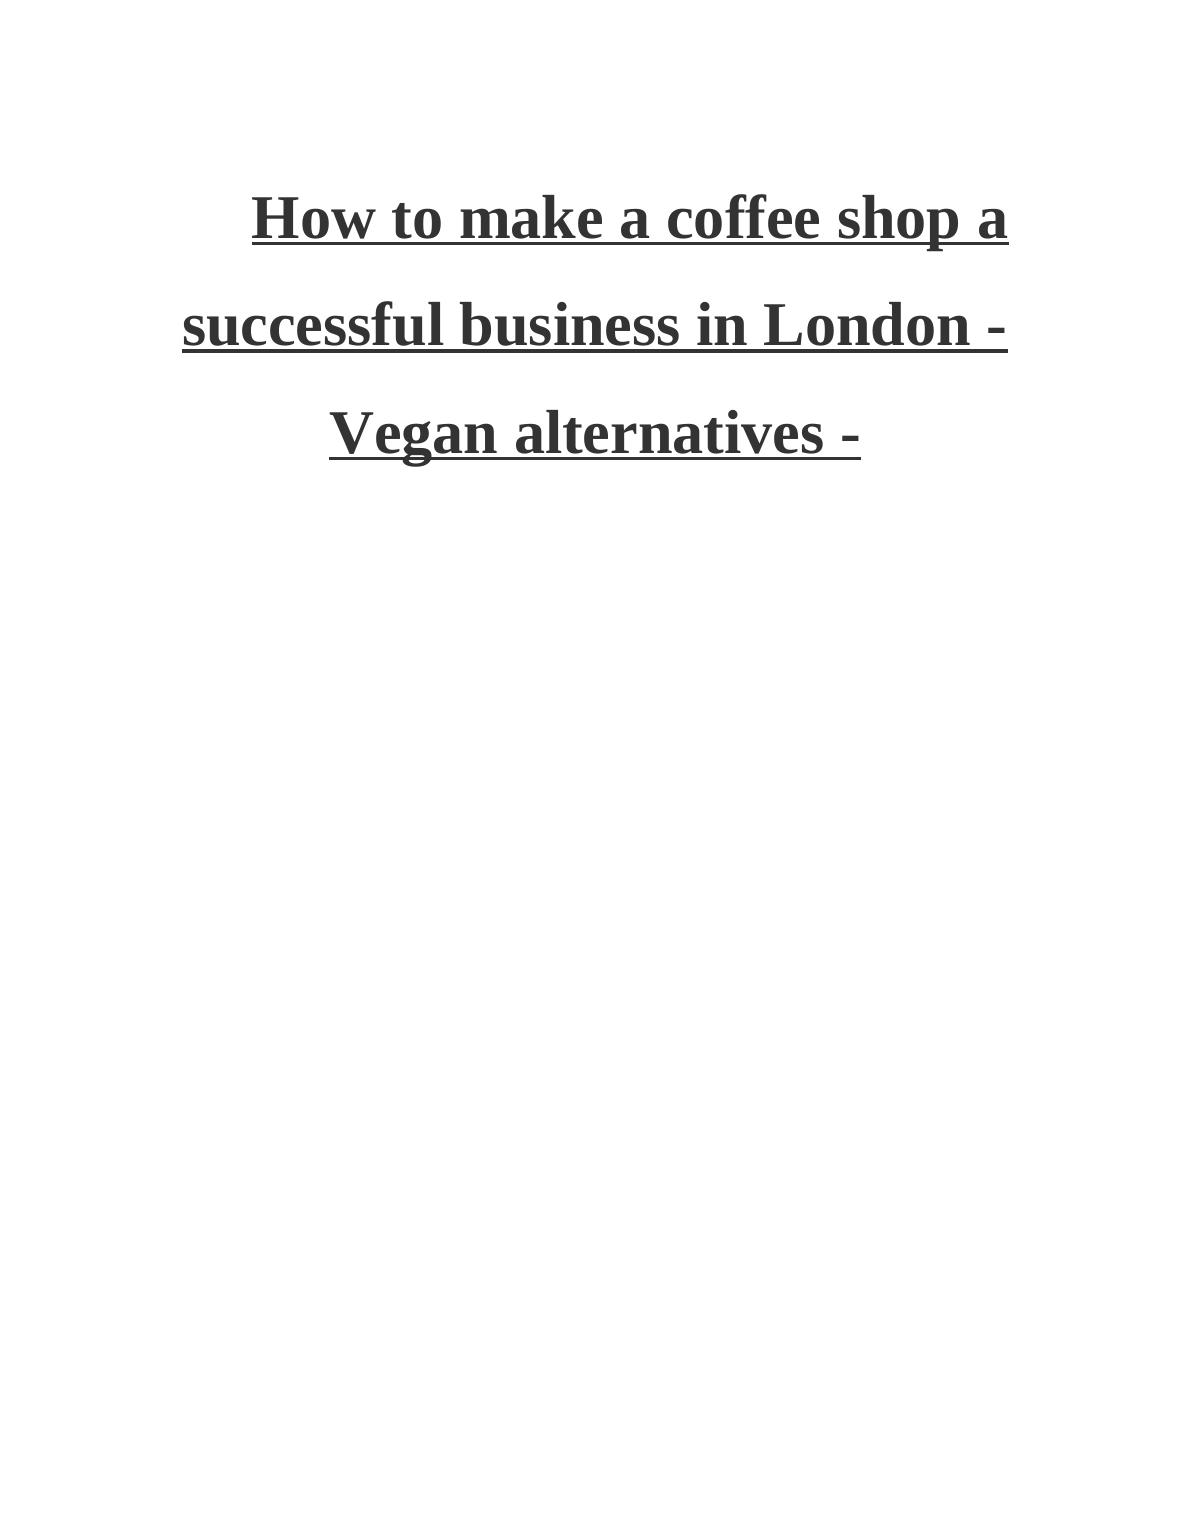 How to make a coffee shop a successful business in London -Vegan alternatives_1